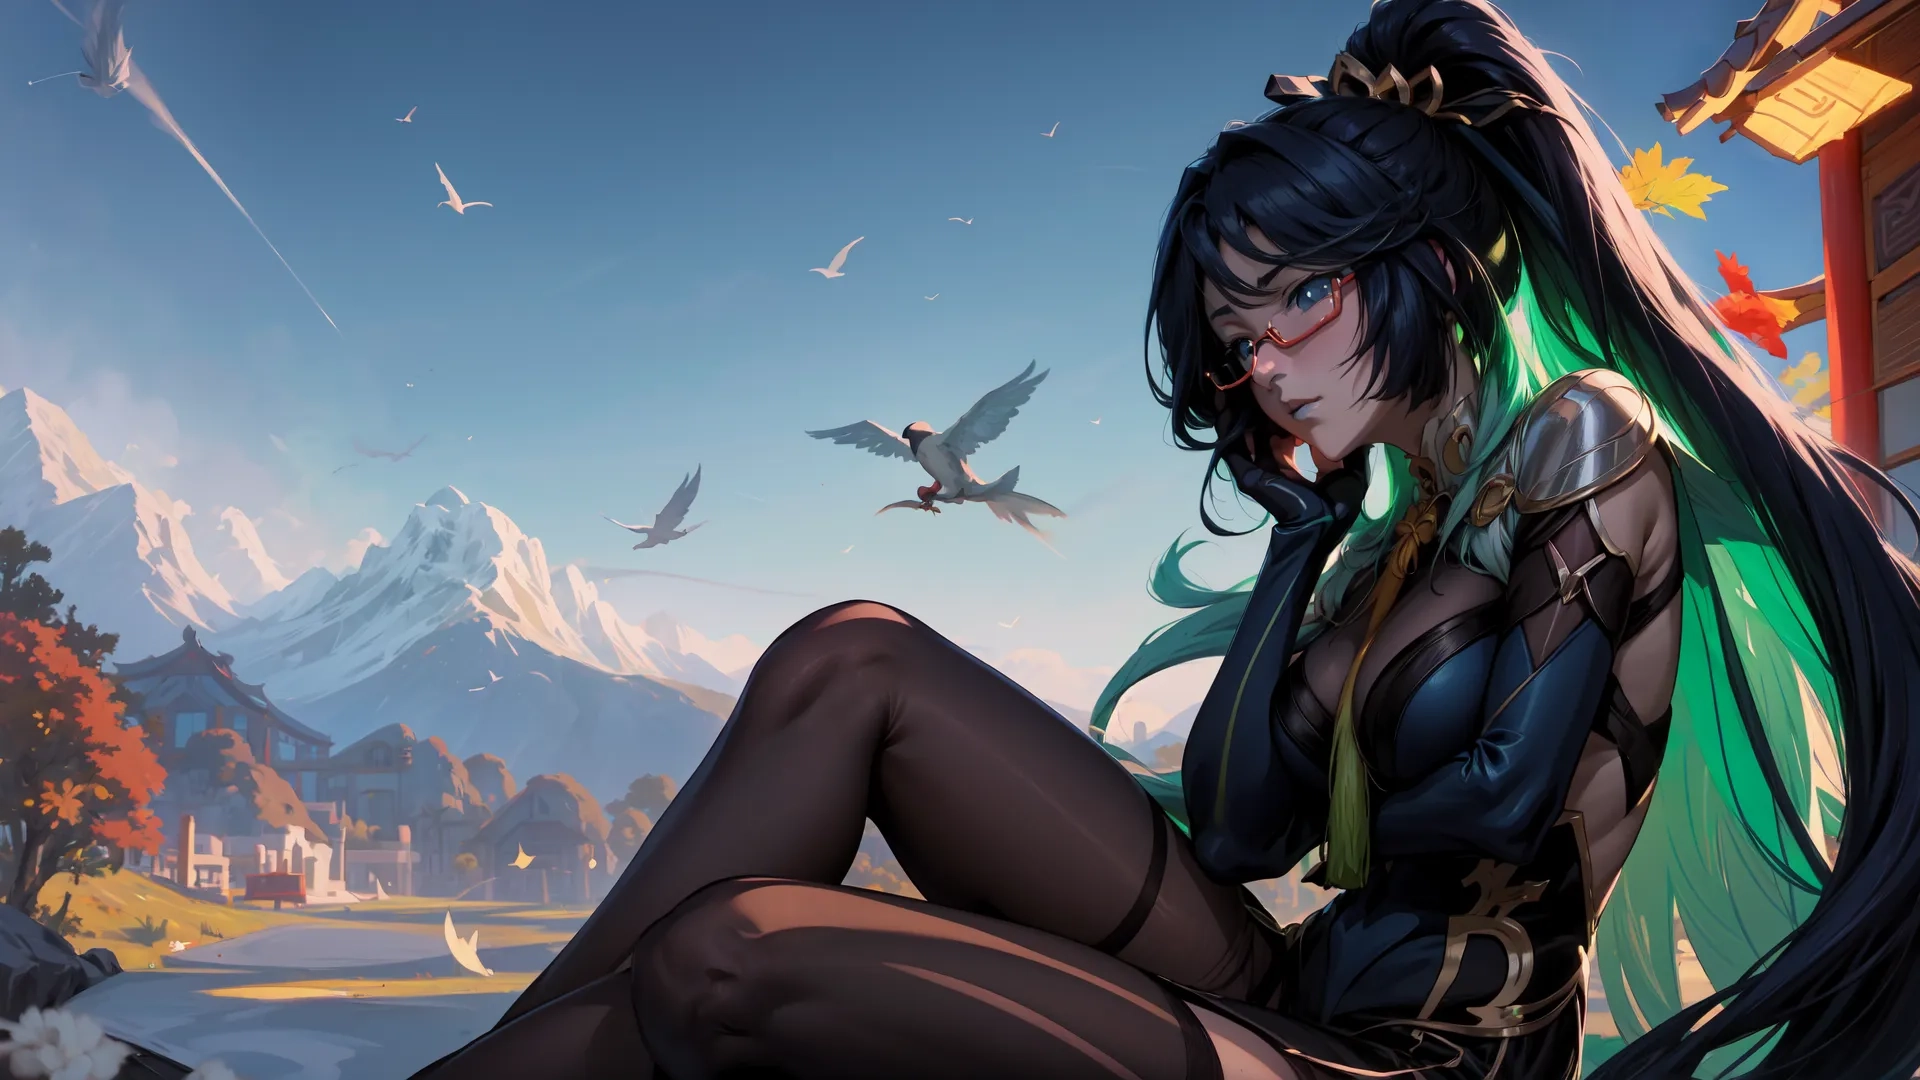 young female with long black hair sitting next to an umbrella looking away and into the distance with a mountain backdrop, birds in the sky and leaves flying in the foreground
